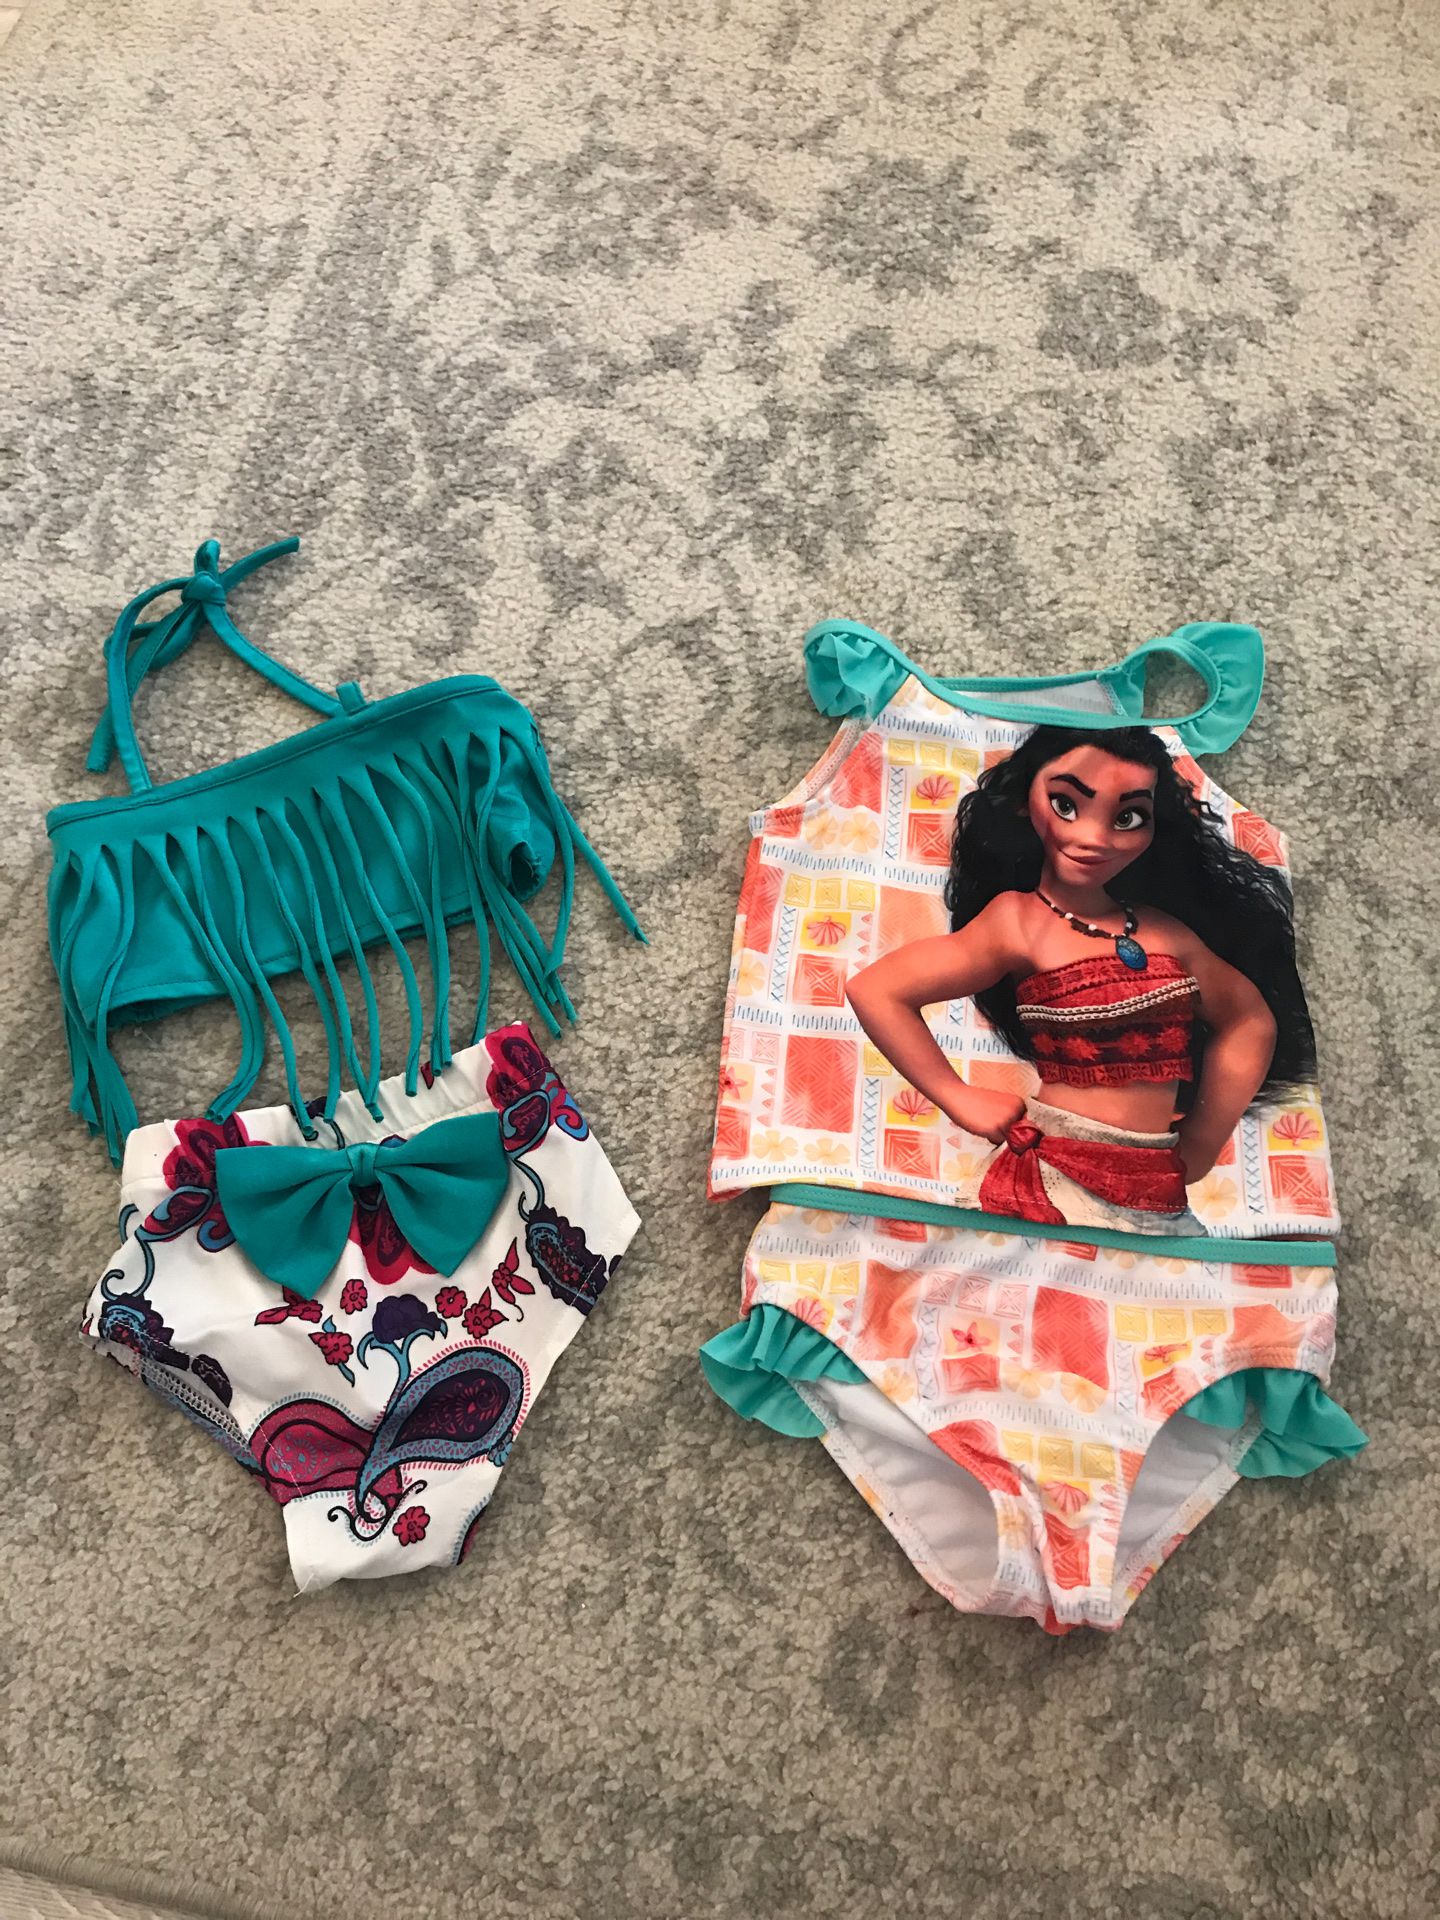 Toddler swimsuits